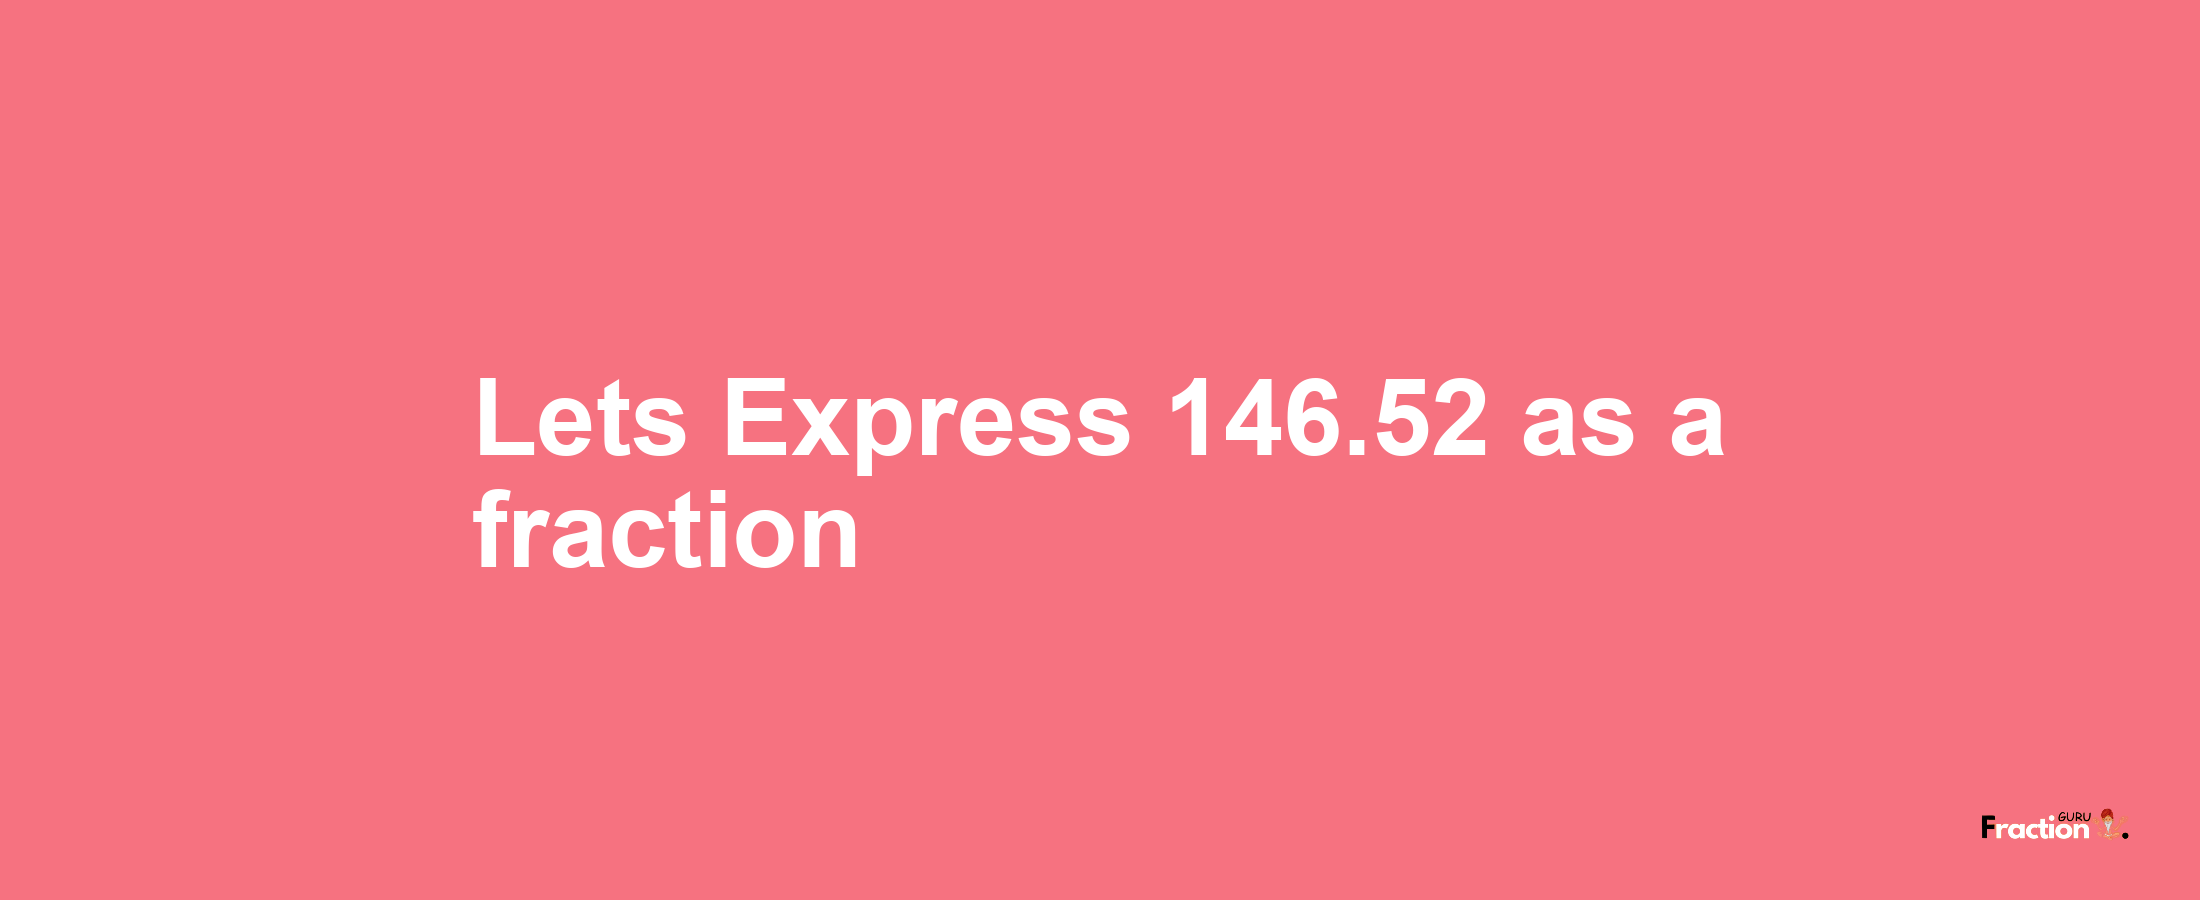 Lets Express 146.52 as afraction